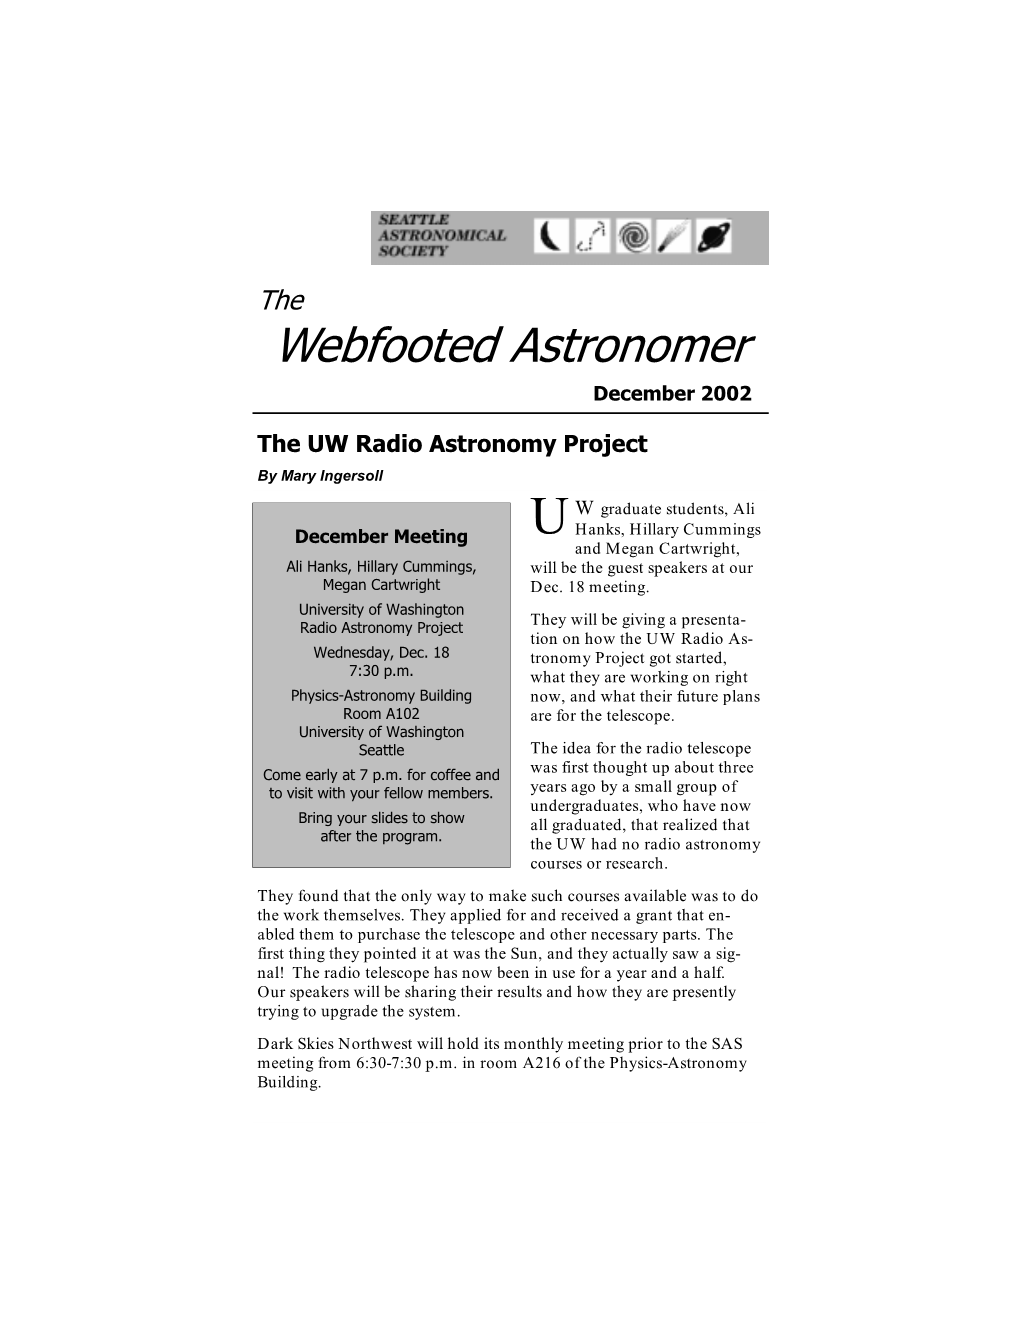 Webfooted Astronomer December 2002